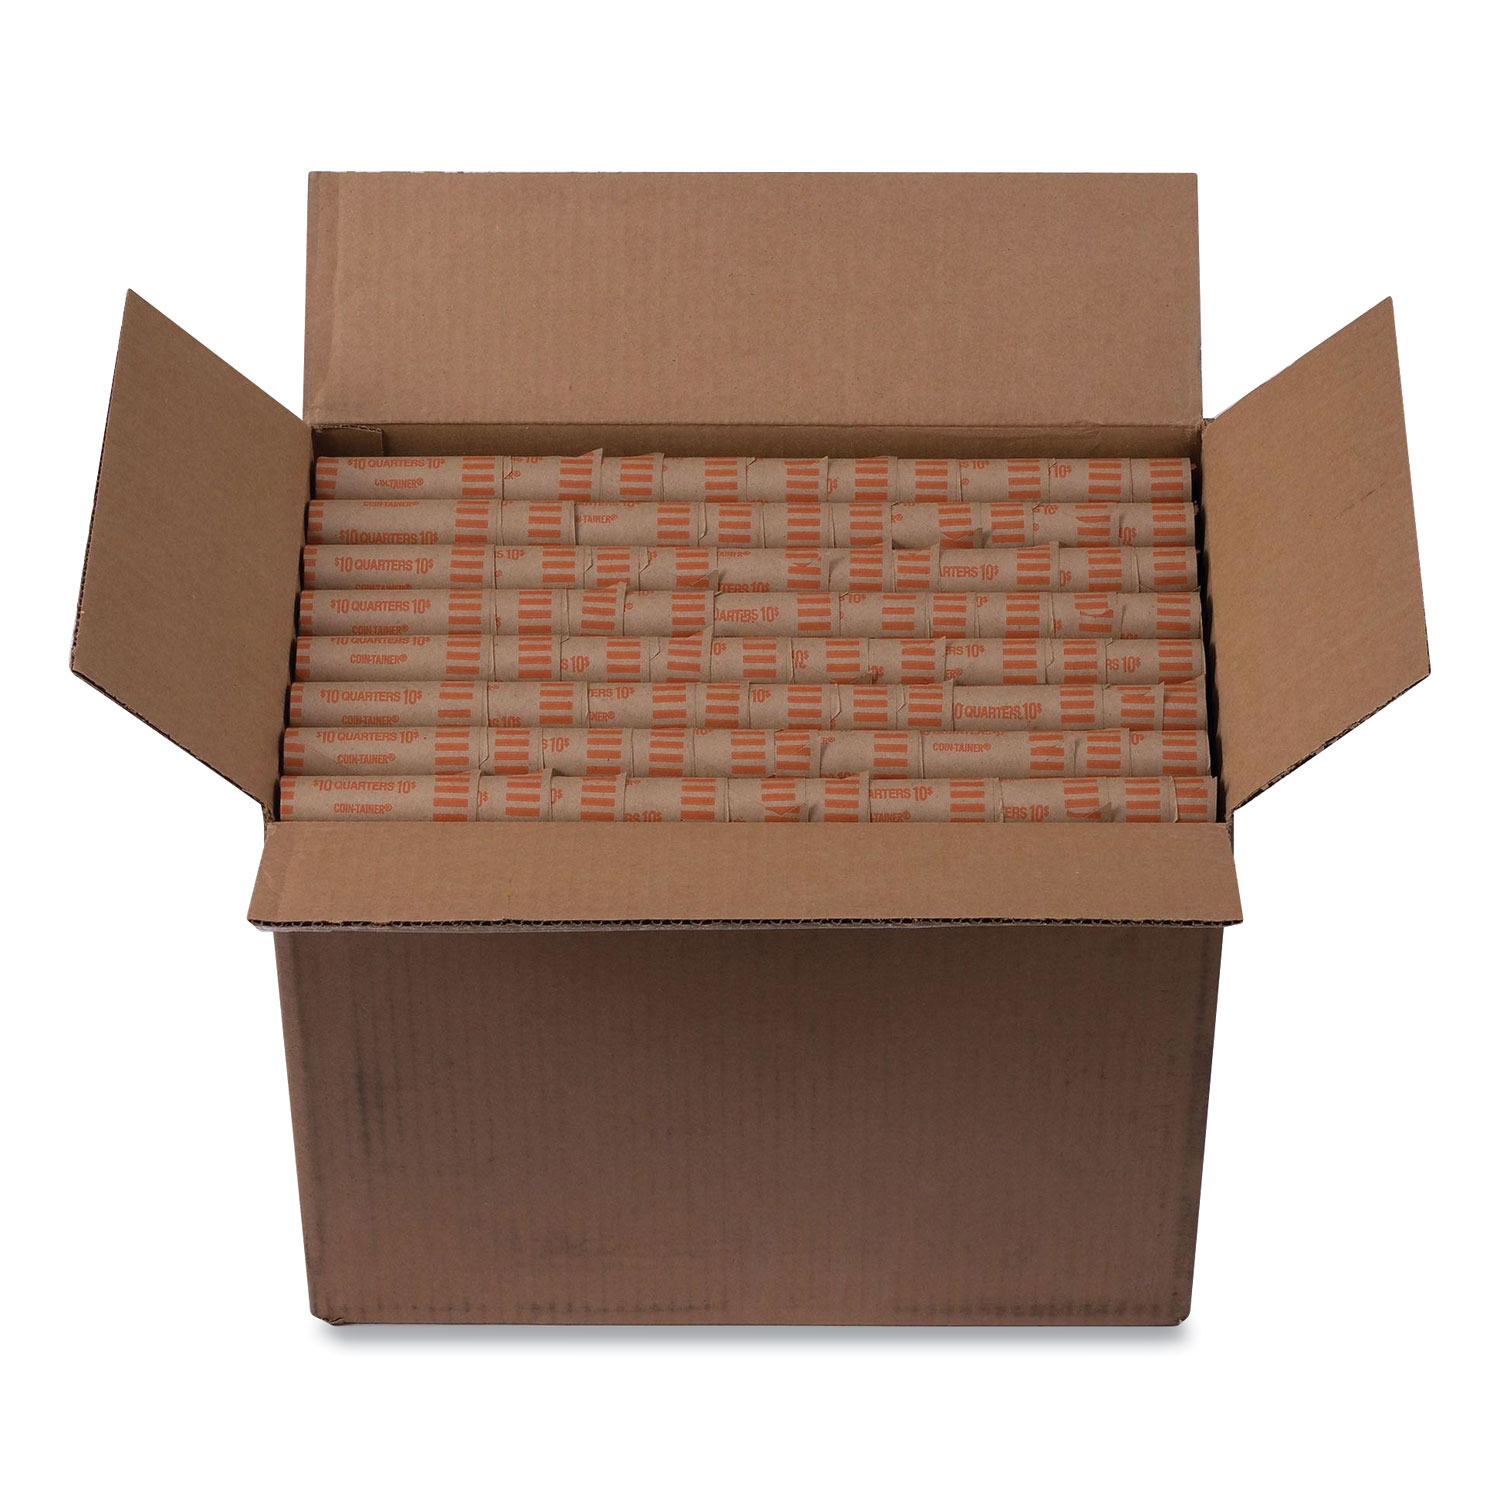 Pap-R Products Preformed Tubular Coin Wrappers, Quarters, $10, 1000 Wrappers/Box